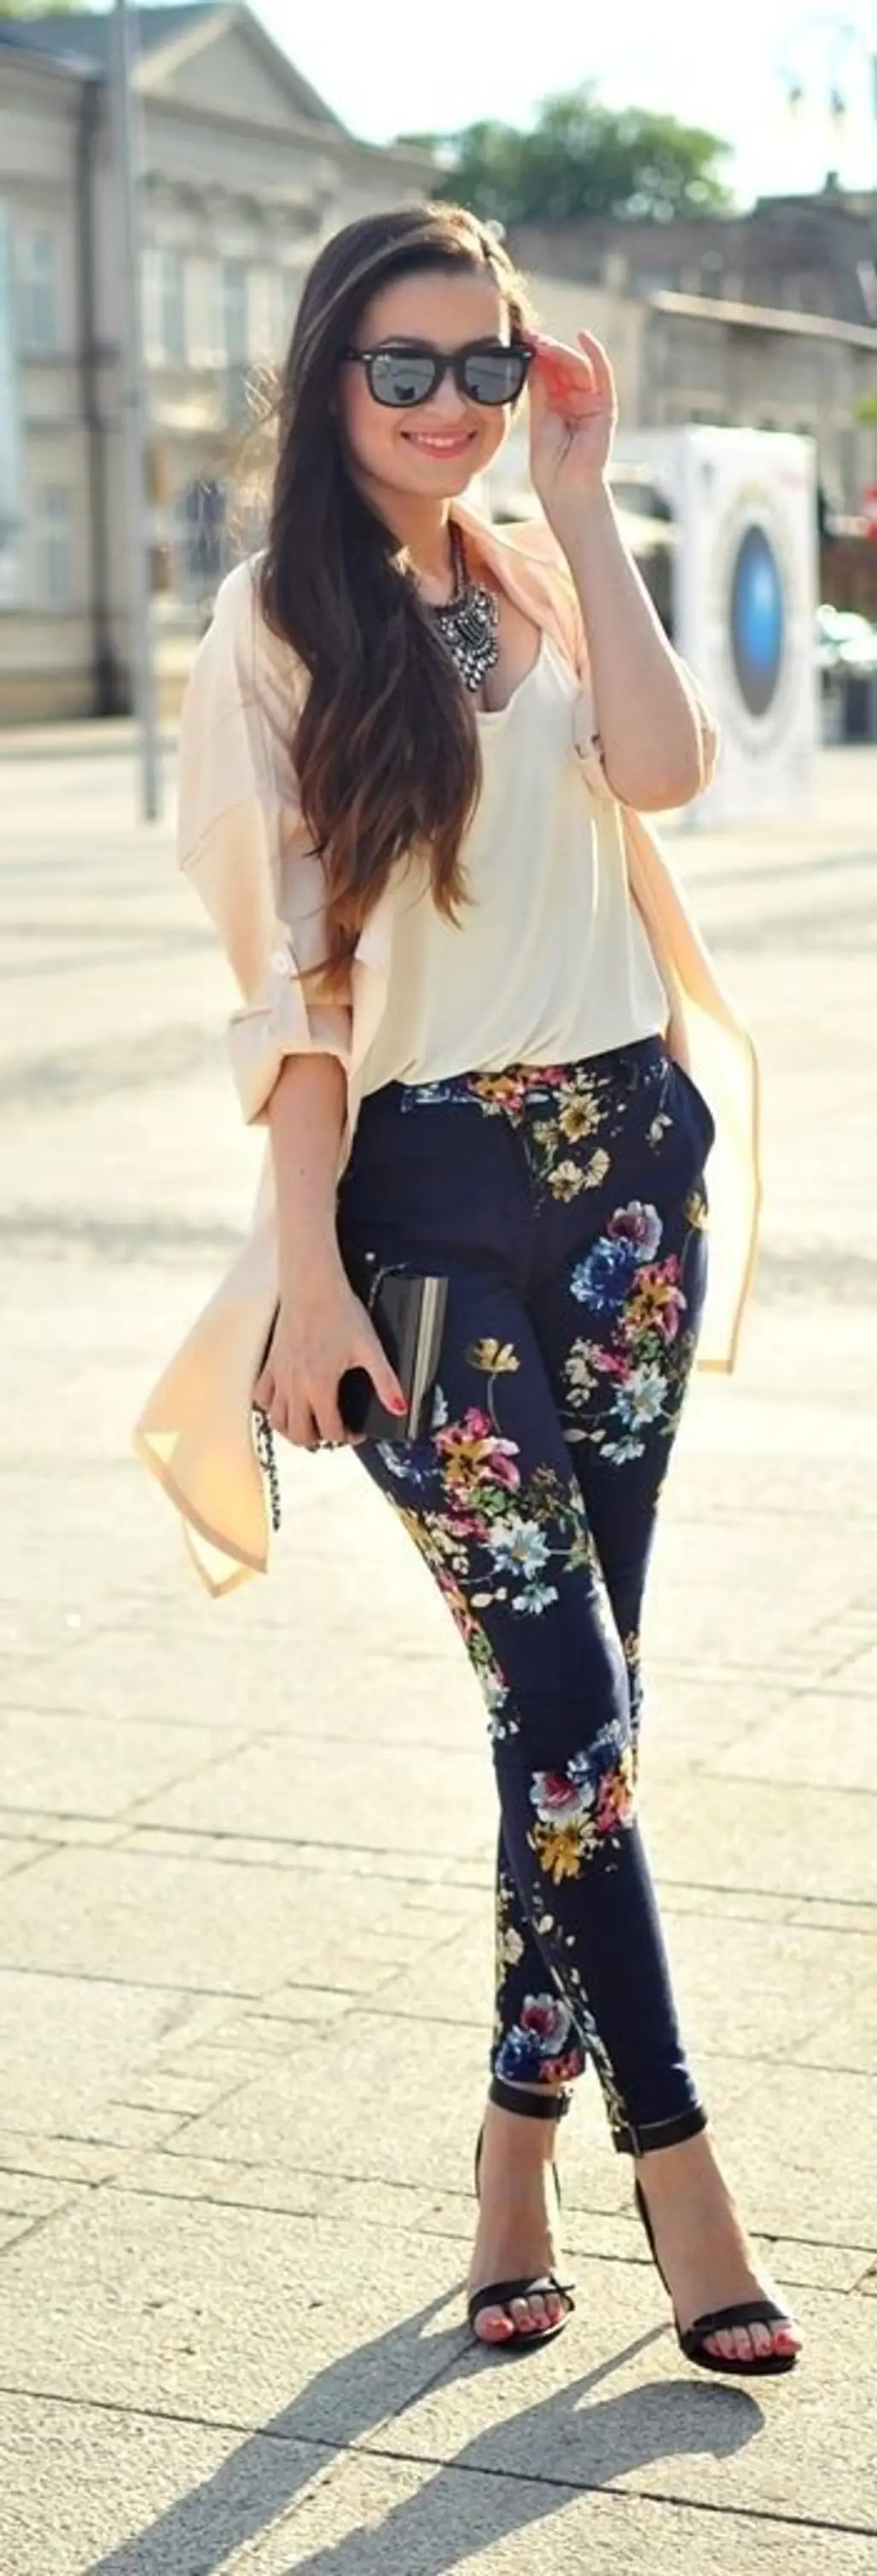 How to Style Floral Print Pants